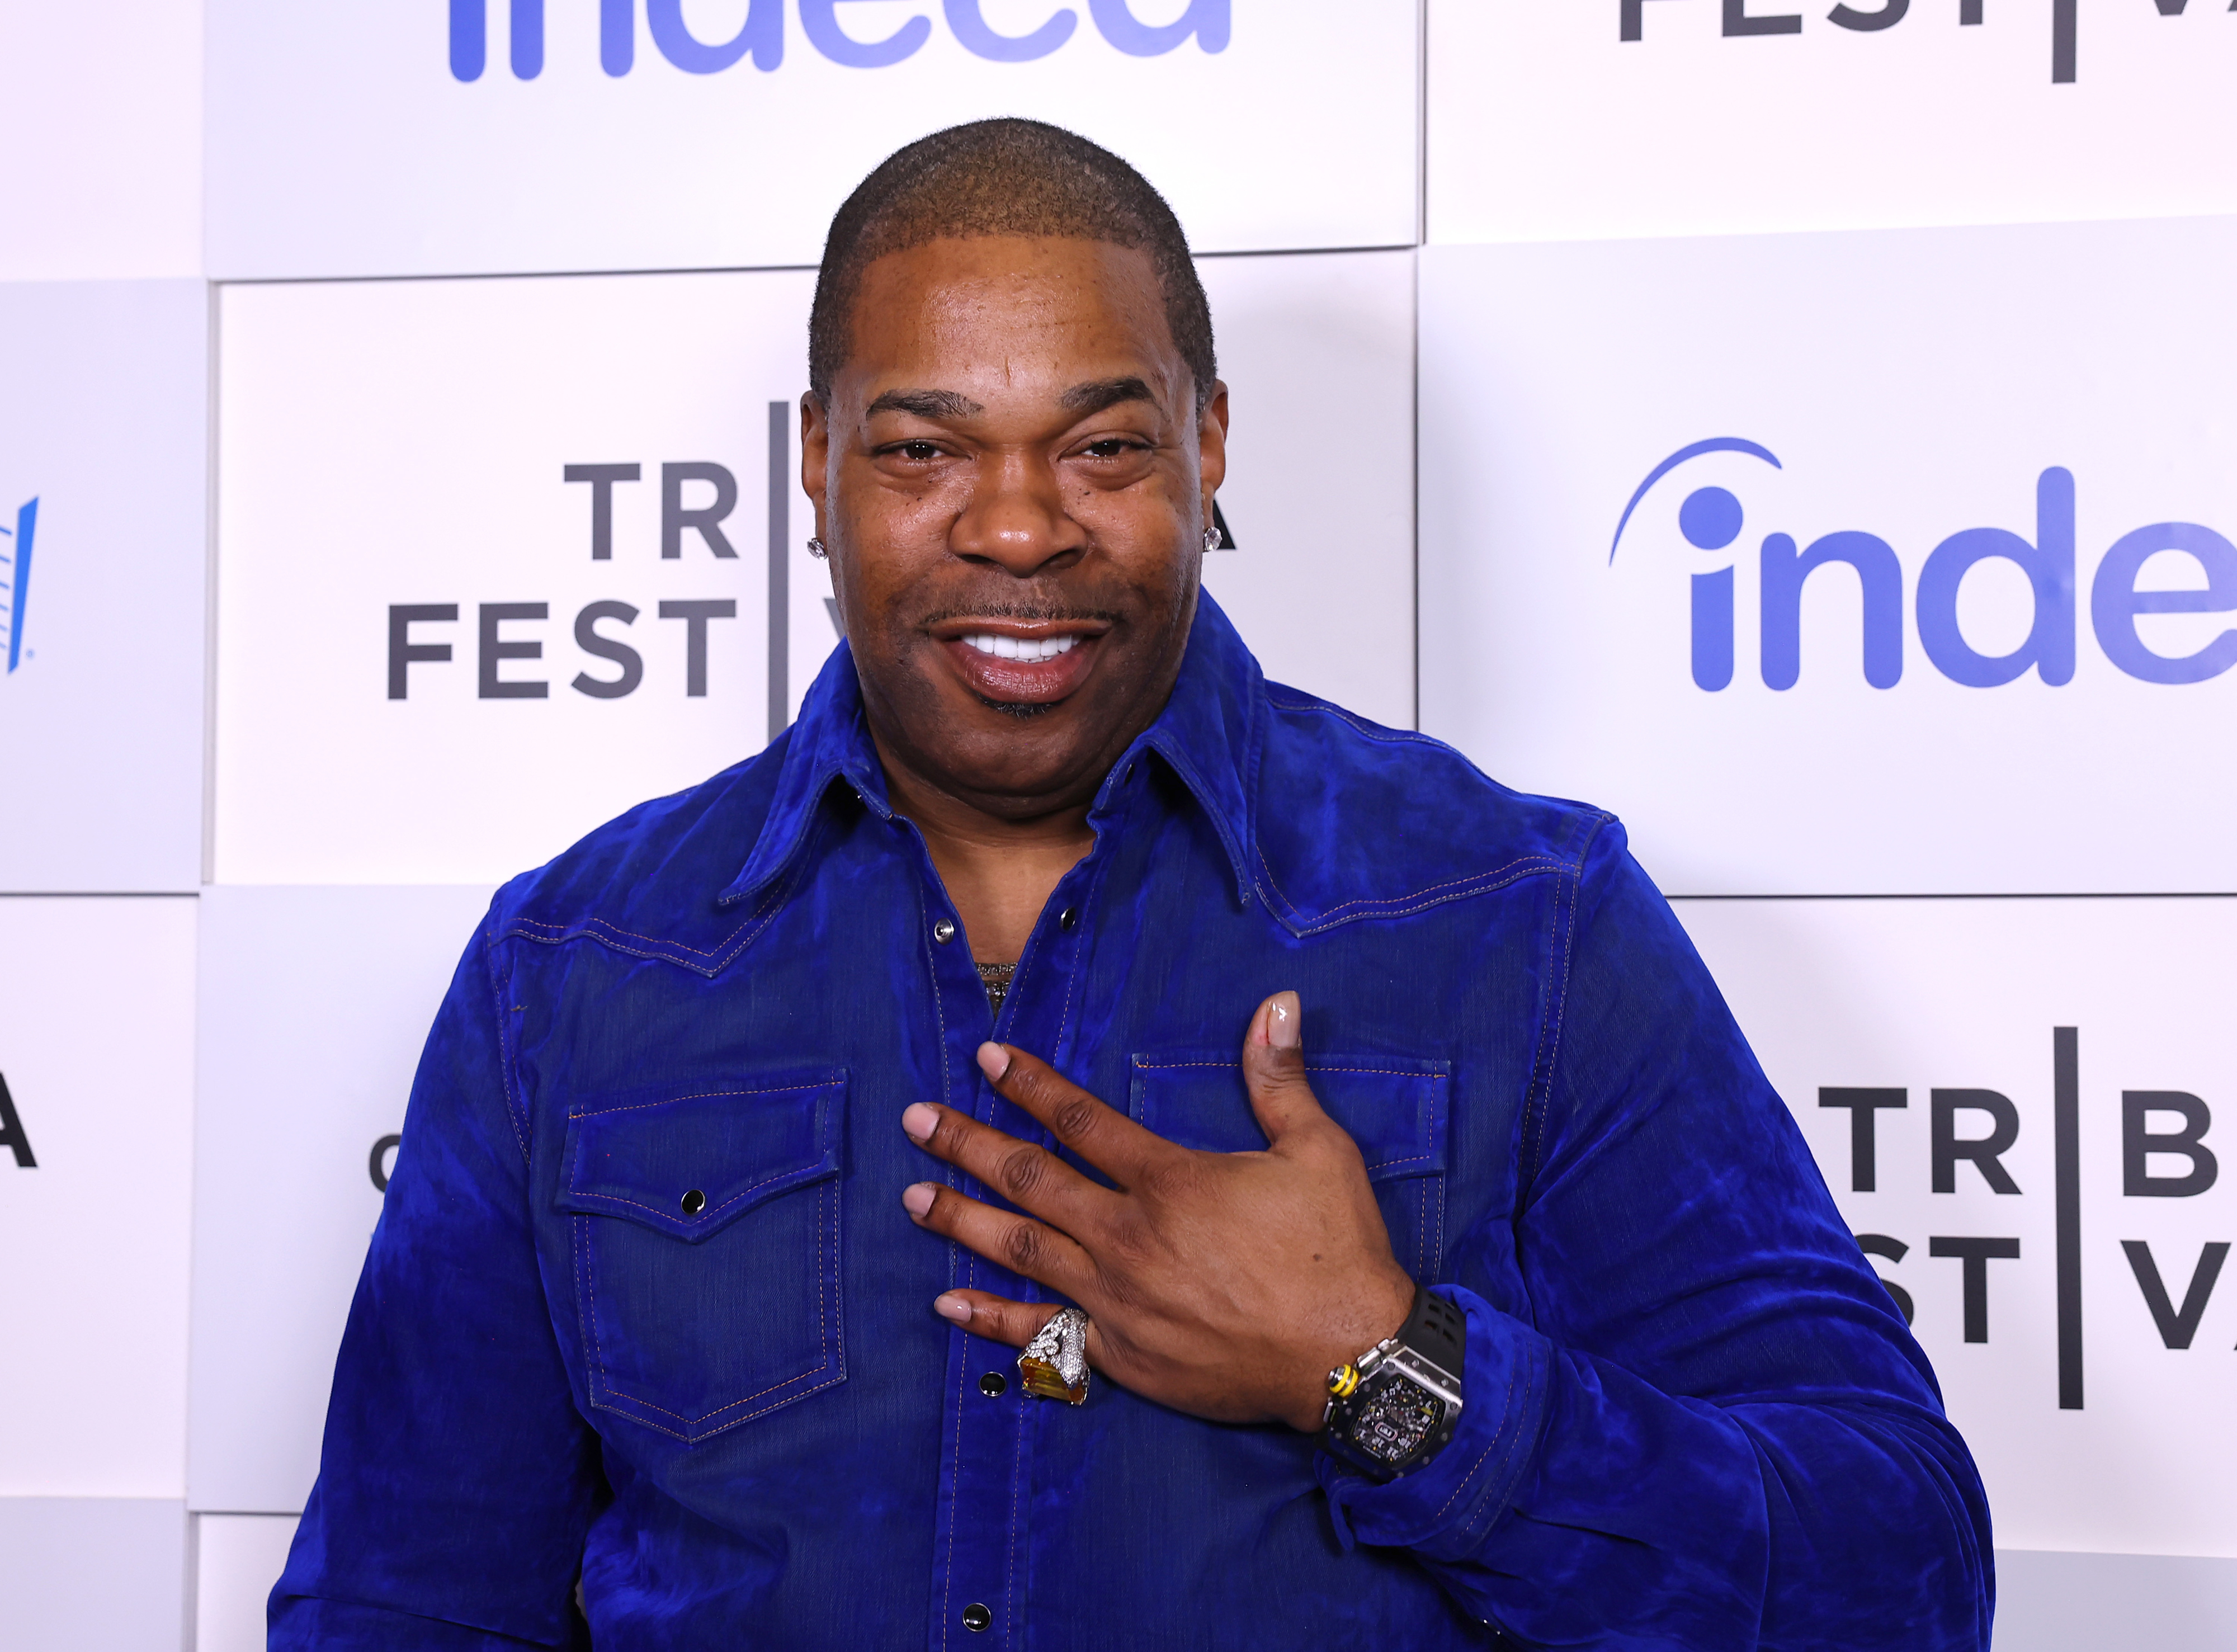 Busta Rhymes poses on the red carpet at the Tribeca Festival, wearing a stylish button-up shirt